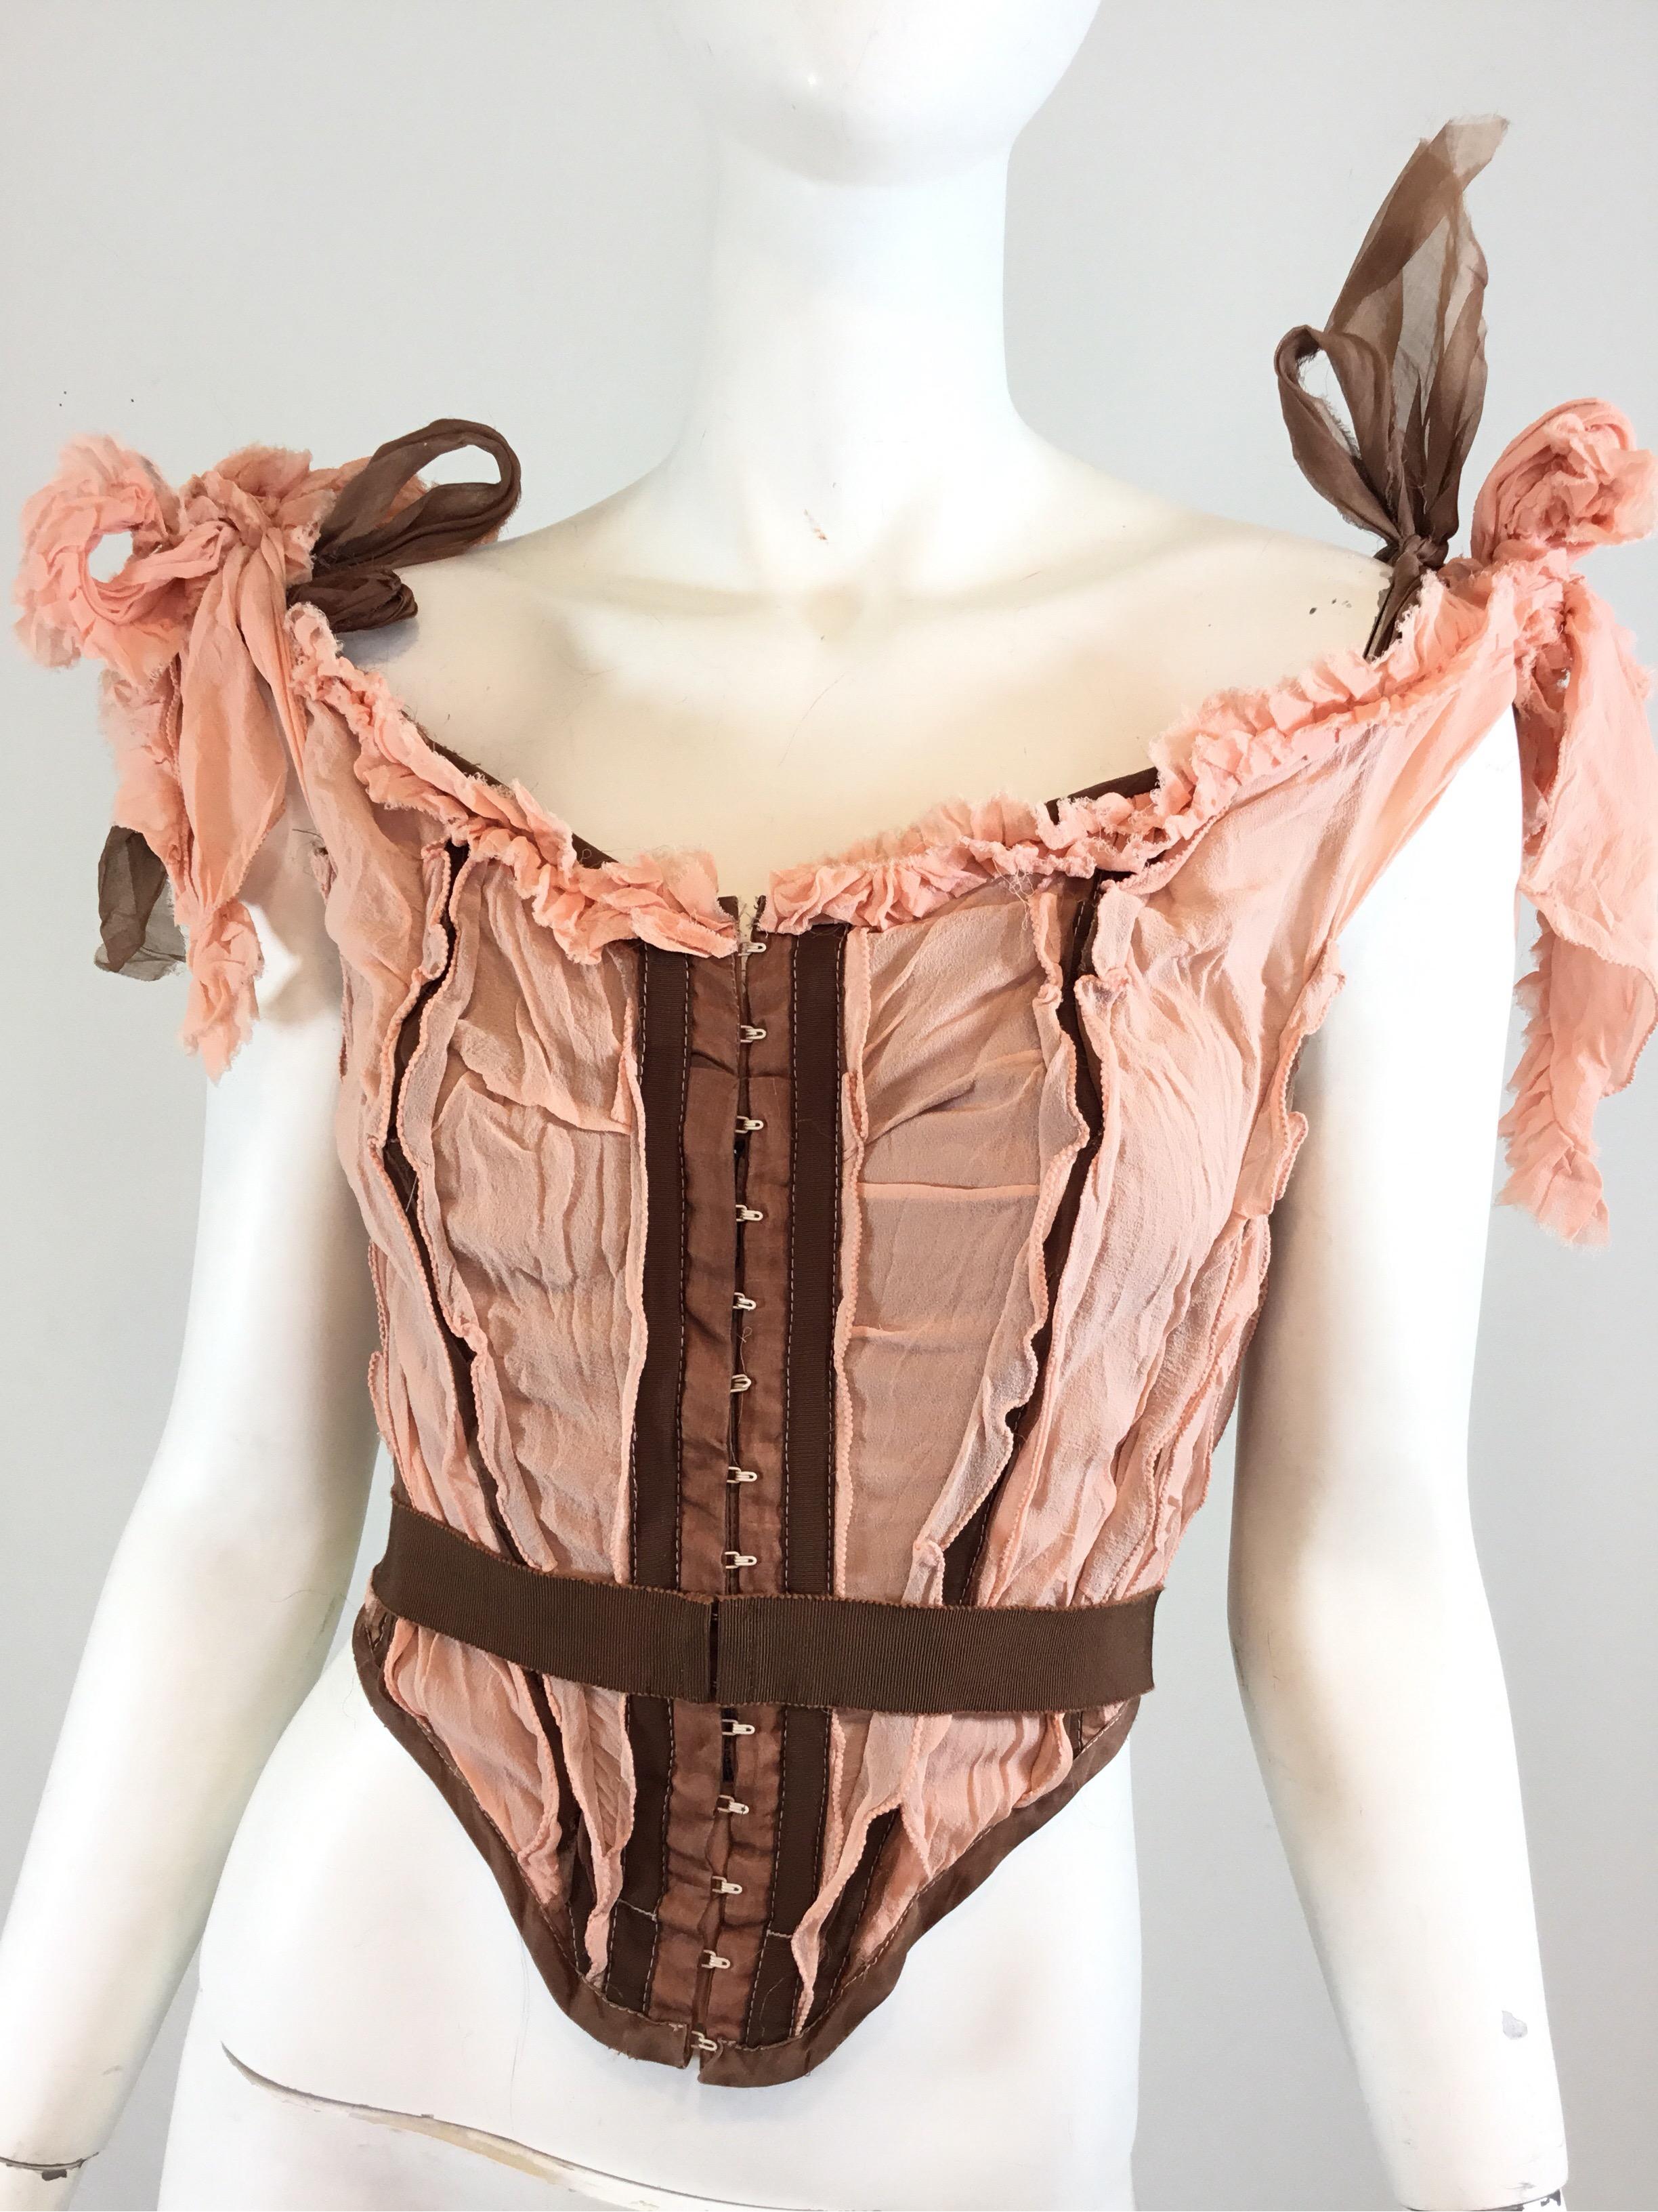 Jean Paul Gaultier corset from Spring/Summer 2005 RTW collection. Corset is featured in a pink and brown color with lace tie and hook closures. Shoulder straps are adjustable and can be untied. Designer label has been removed from the